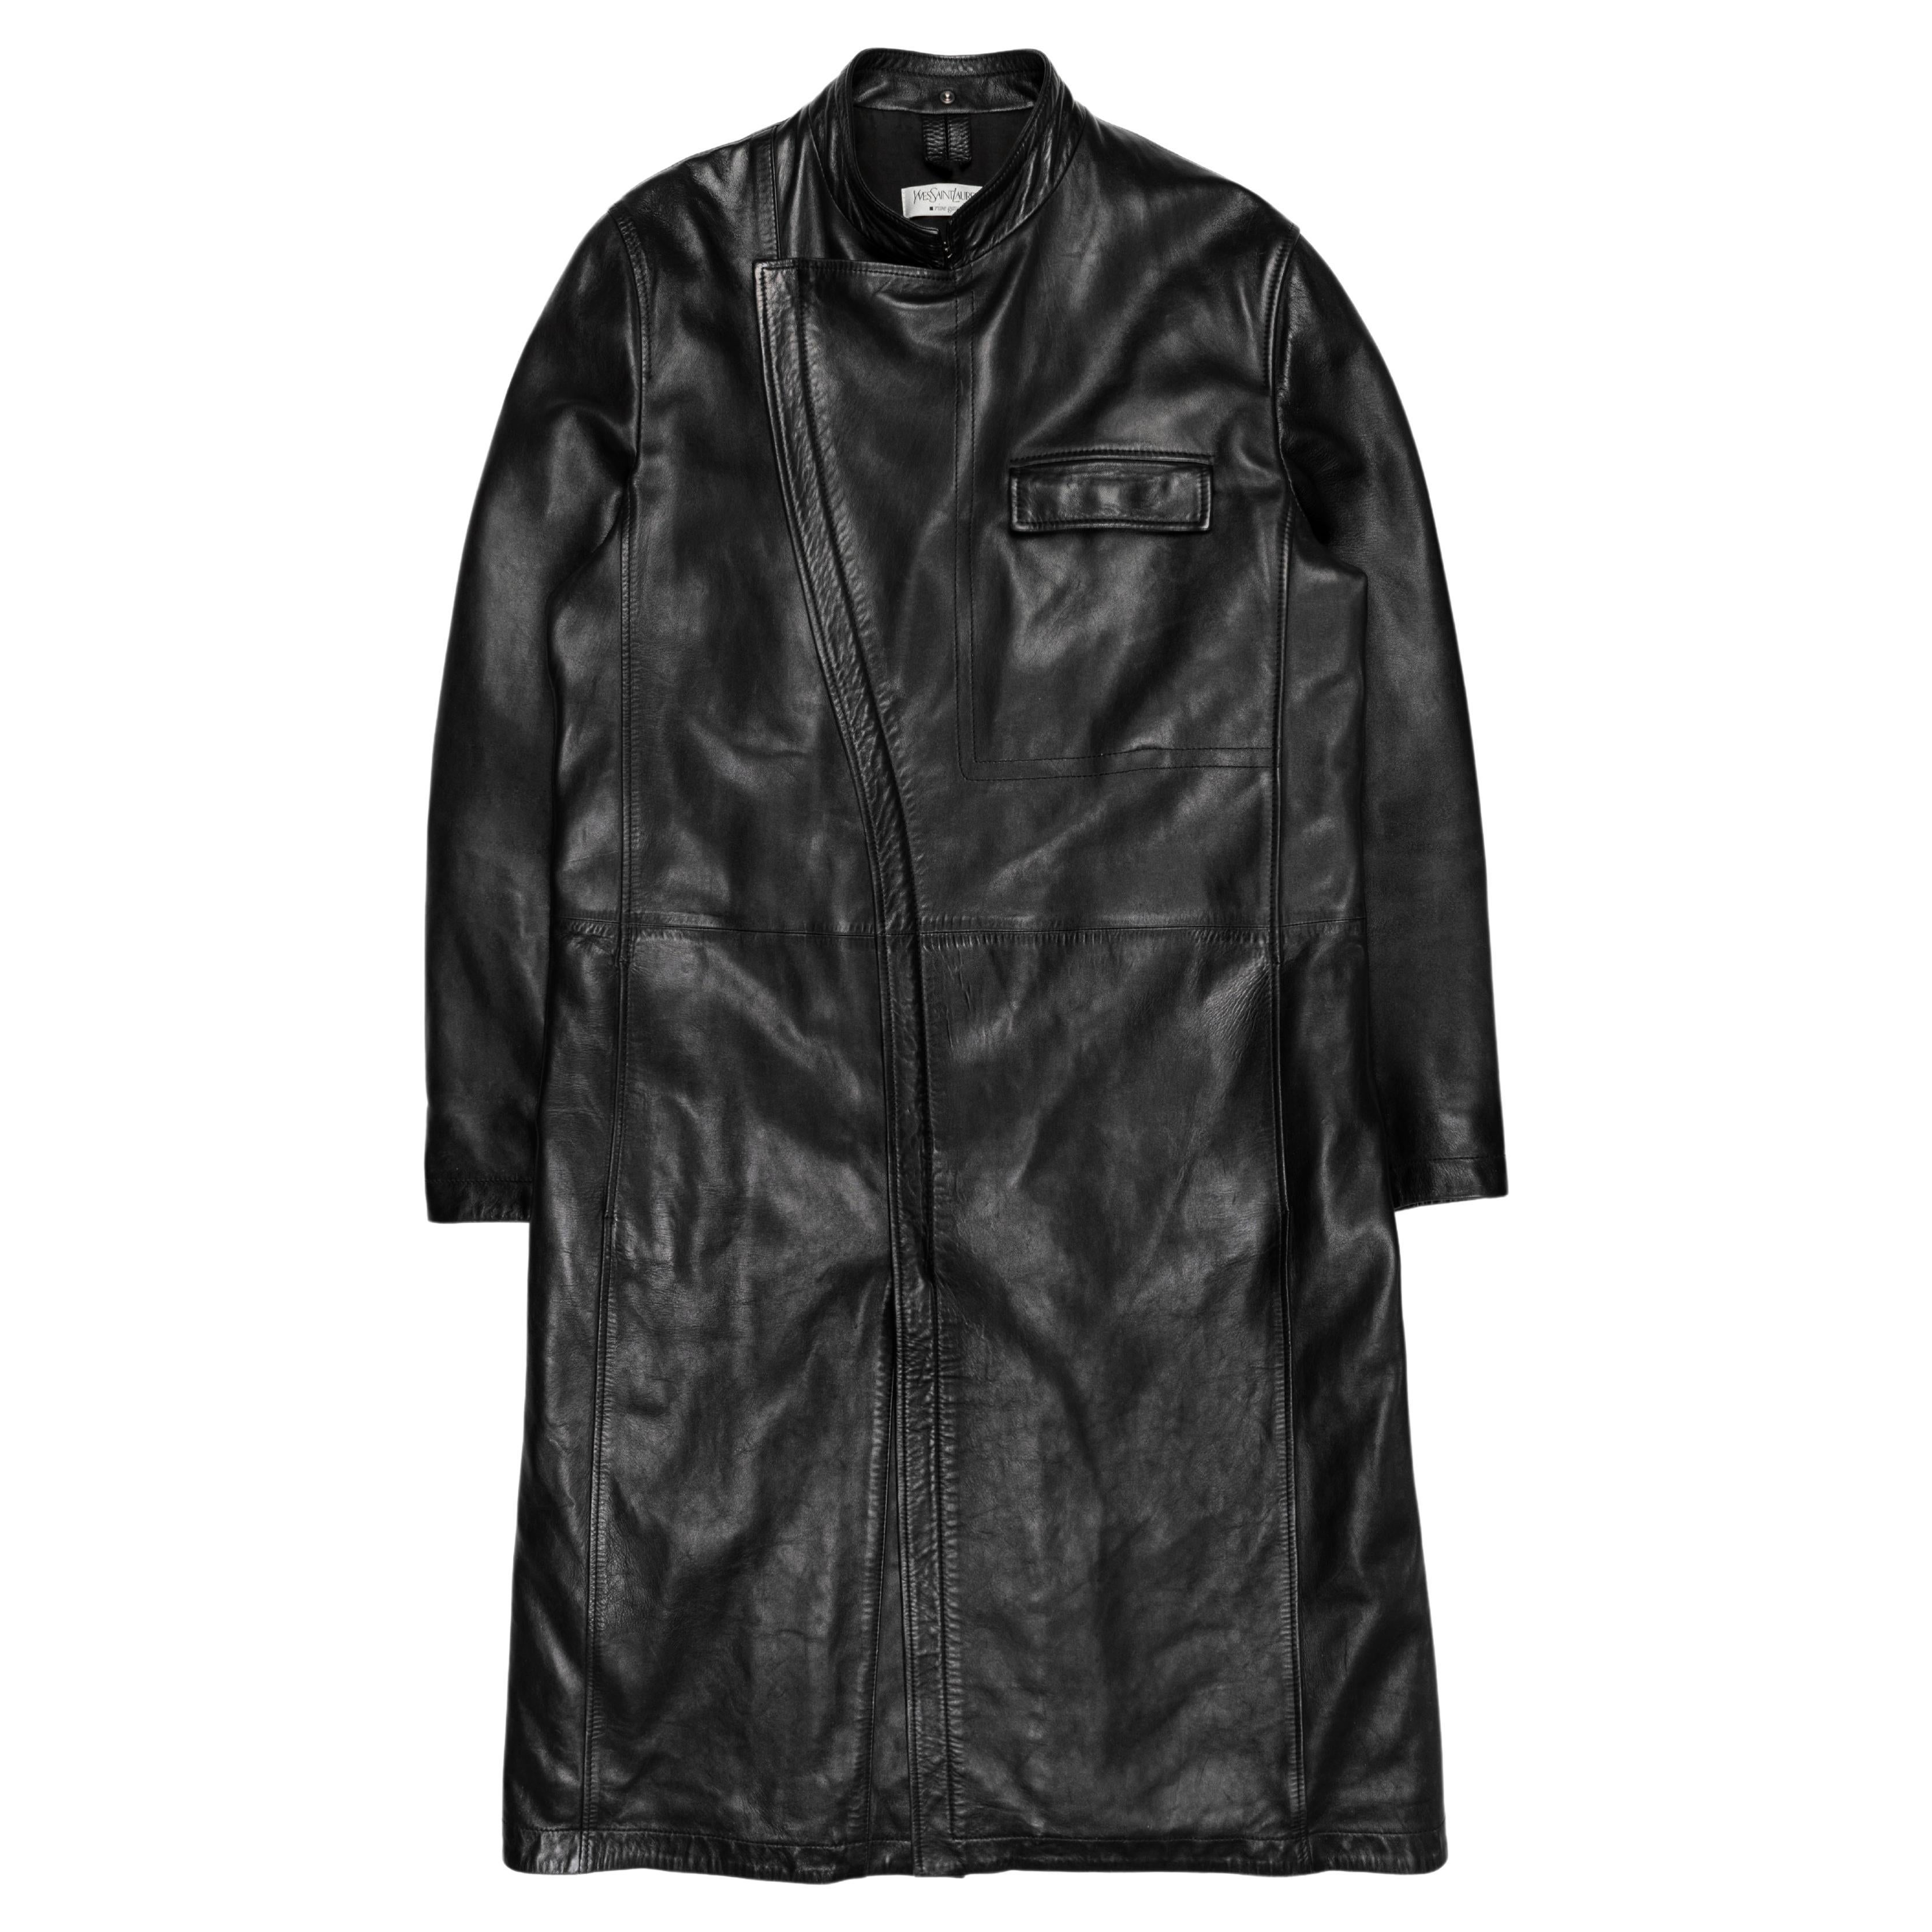 YVES SAINT LAURENT 2004 Tom Ford Final Collection Silk Jacket w/ Tags ...